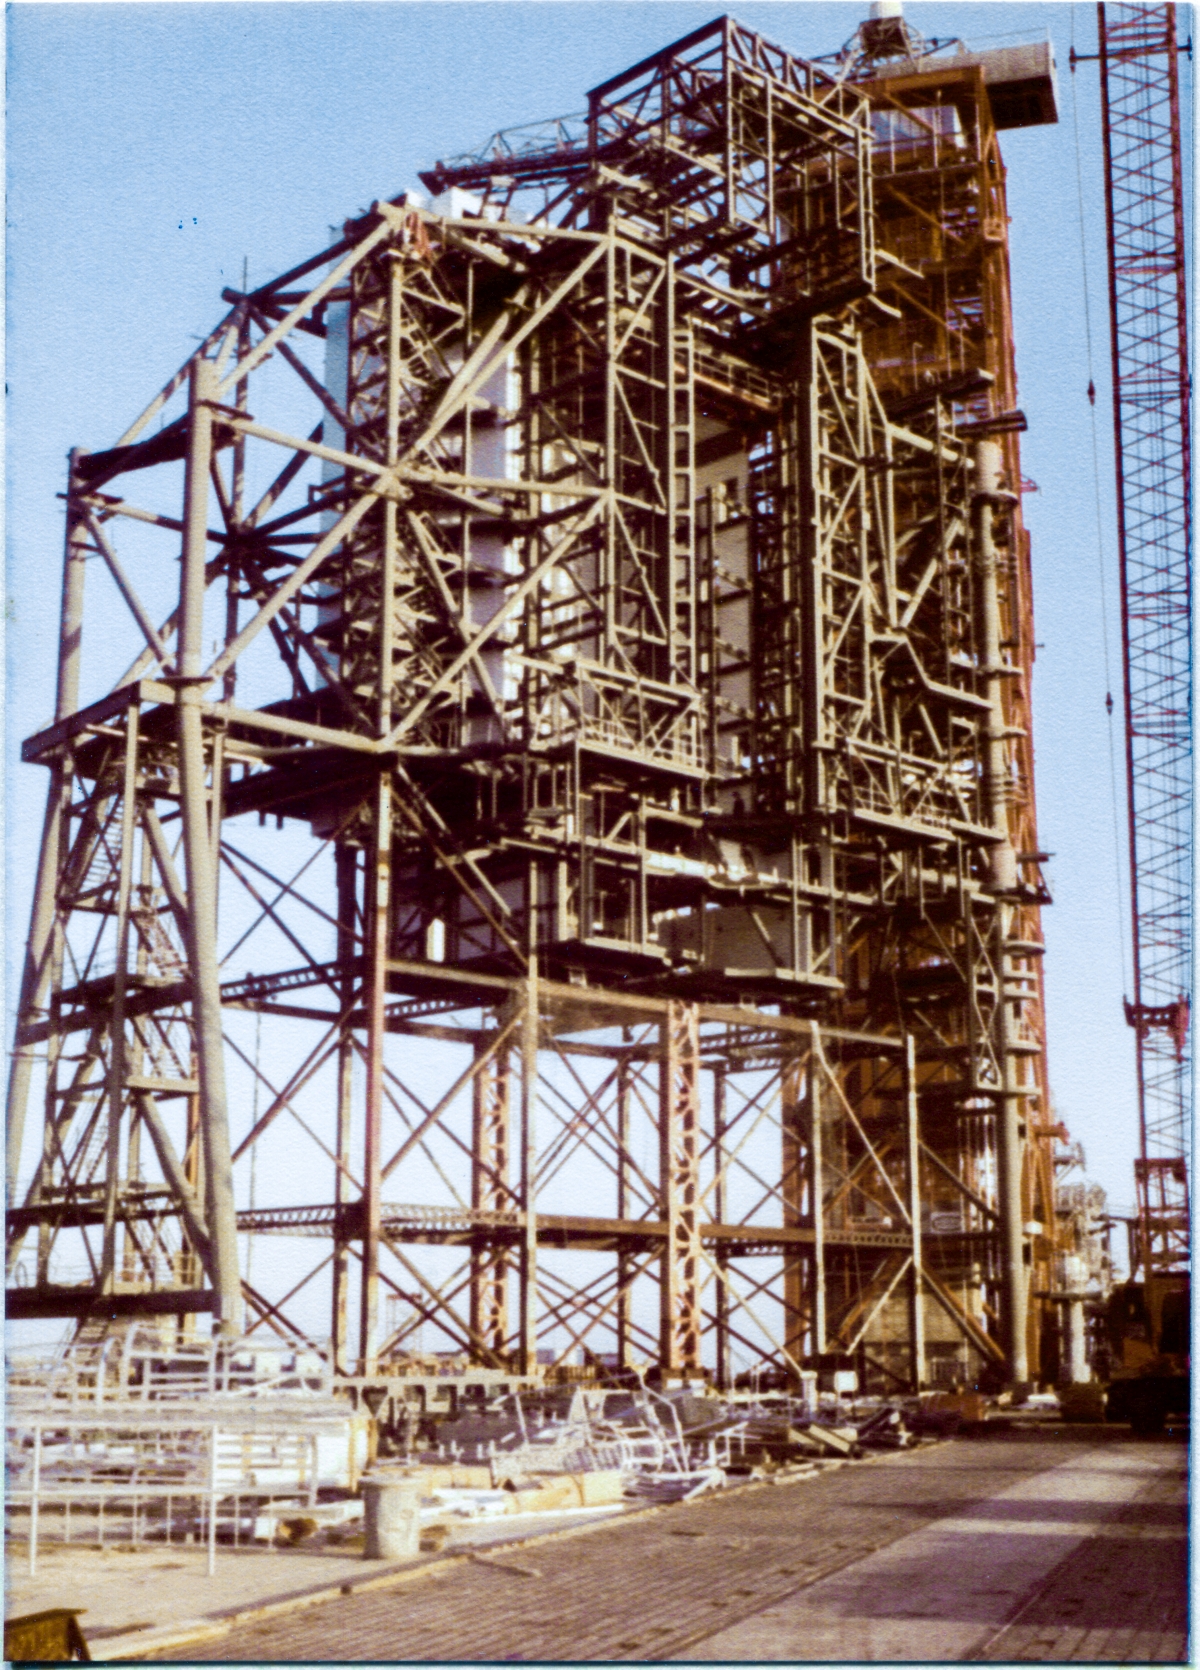 Image 007. Rising nearly 200 feet above the level of the Crawlerway you’re looking at it from (which itself rises nearly 50 feet above the level of the surrounding wetlands), the Rotating Service Structure at Space Shuttle Launch Complex 39-B, Kennedy Space Center, Florida, stands as an open skeleton, still partially supported on the falsework which the Union Ironworkers working for Wilhoit Steel Erectors constructed first, to hold it up temporarily while it was being erected, before it became self-supporting and the falsework could then be removed. Behind the gray steel of the RSS, the red framework of the taller Fixed Service Structure, which was built first, reusing parts of an Apollo Project Launch Umbilical Tower, can also be seen. On the pad deck in the foreground beneath the falsework, additional material fabricated by Sheffield Steel, who fabricated all of the structural steel for the RSS, can be seen, awaiting its turn to be lifted into place by Wilhoit’s big Manitowoc crane, visible along the right margin of the image. Photo by James MacLaren.